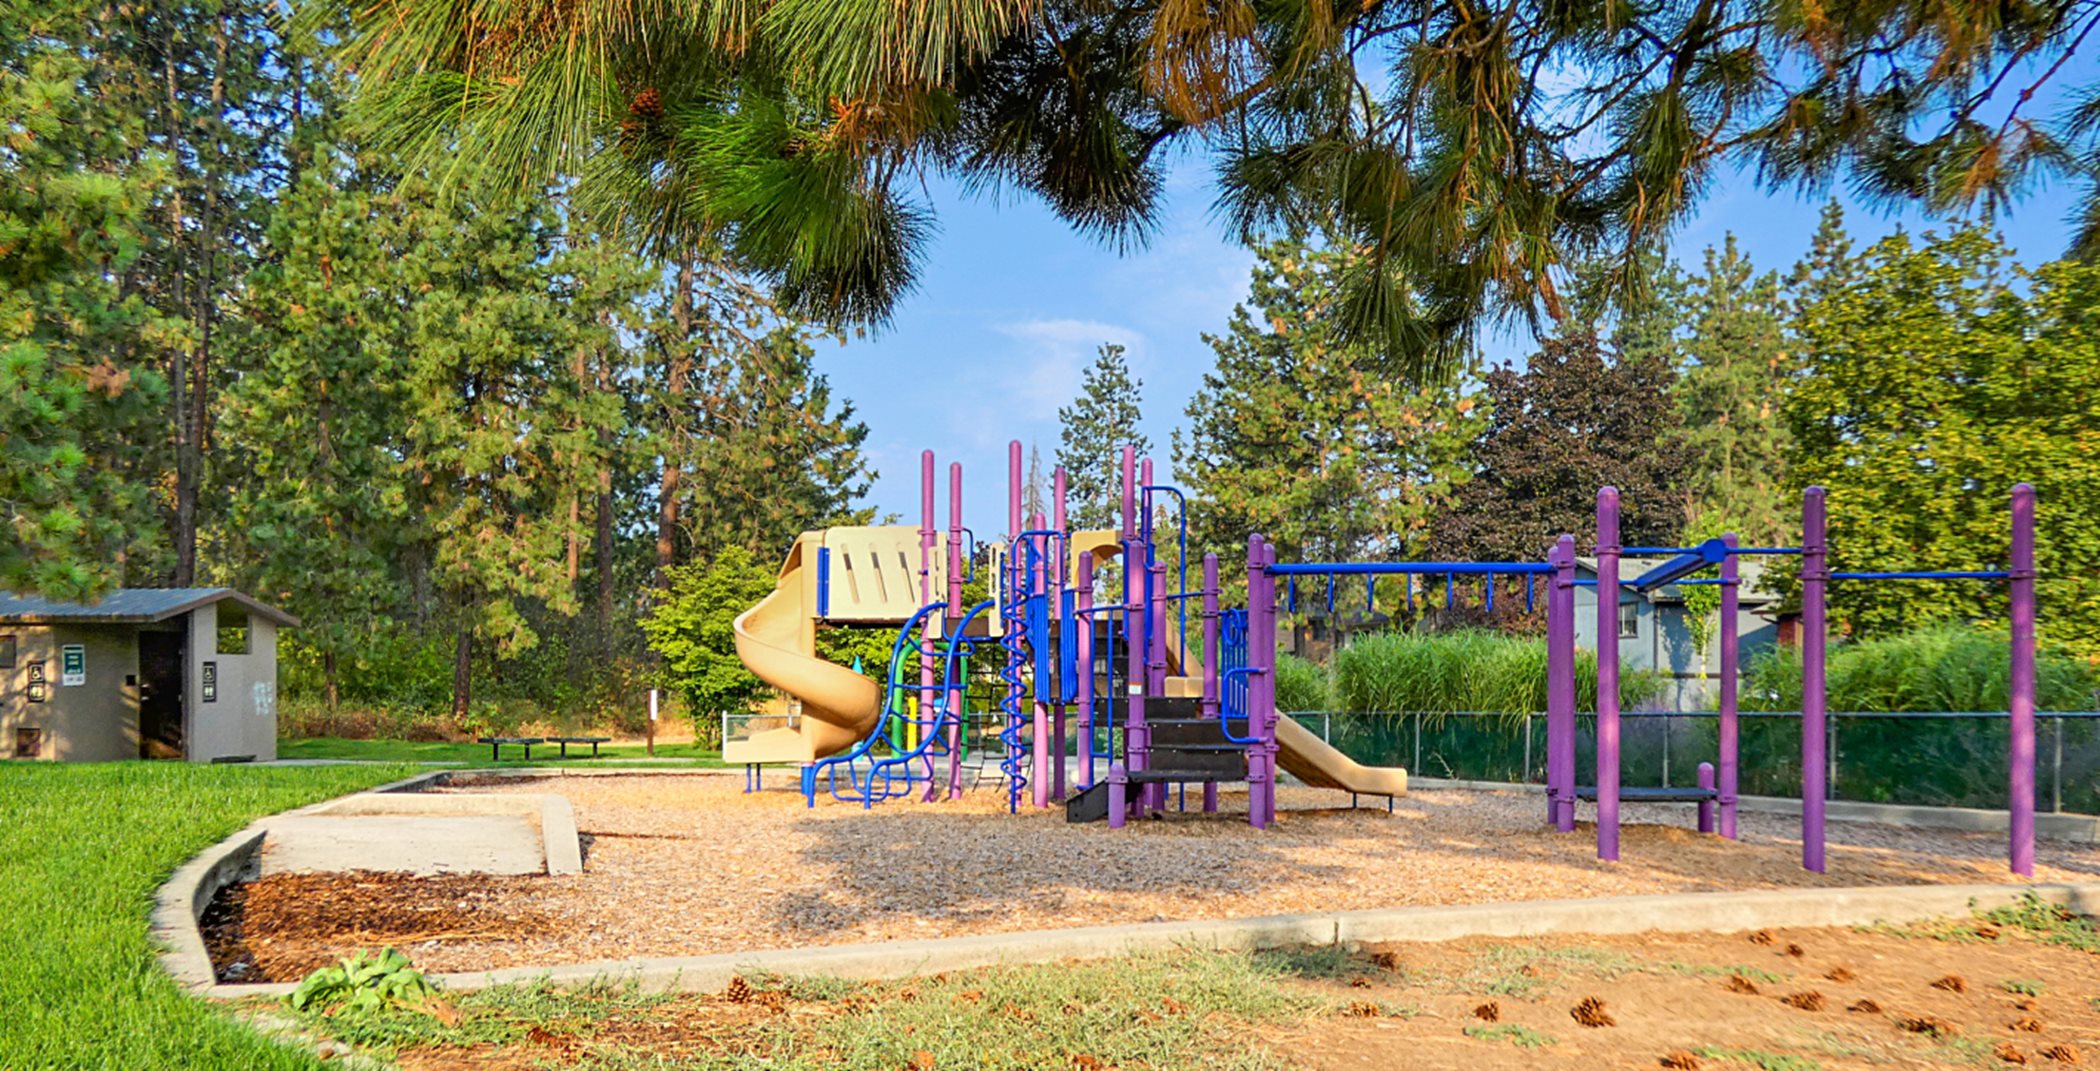 Playset at the park